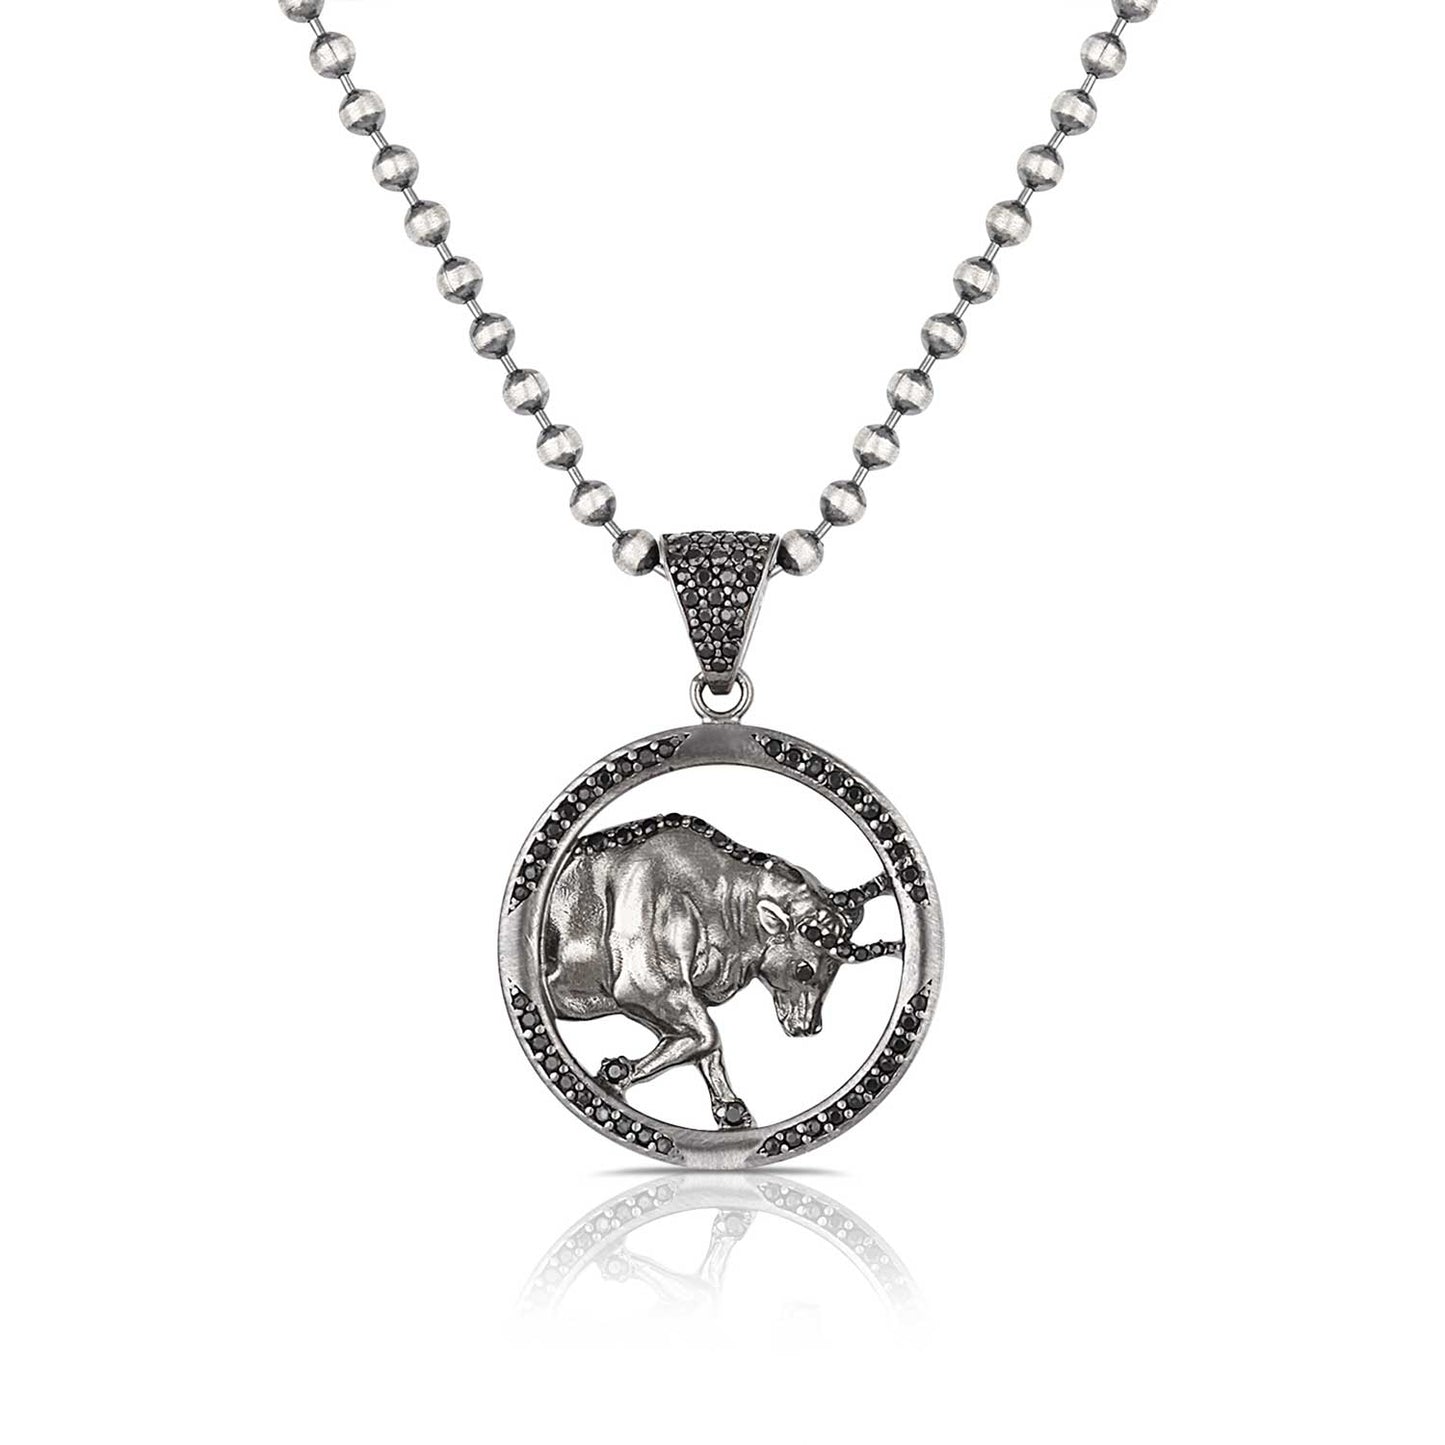 RARE PRINCE by CARAT SUTRA | Unique Taurus Zodiac Designed Pendant Studded with Black Zircons | Unisex 925 Sterling Silver Oxidized Pendant | Men's Jewelry | With Certificate of Authenticity and 925 Hallmark - caratsutra